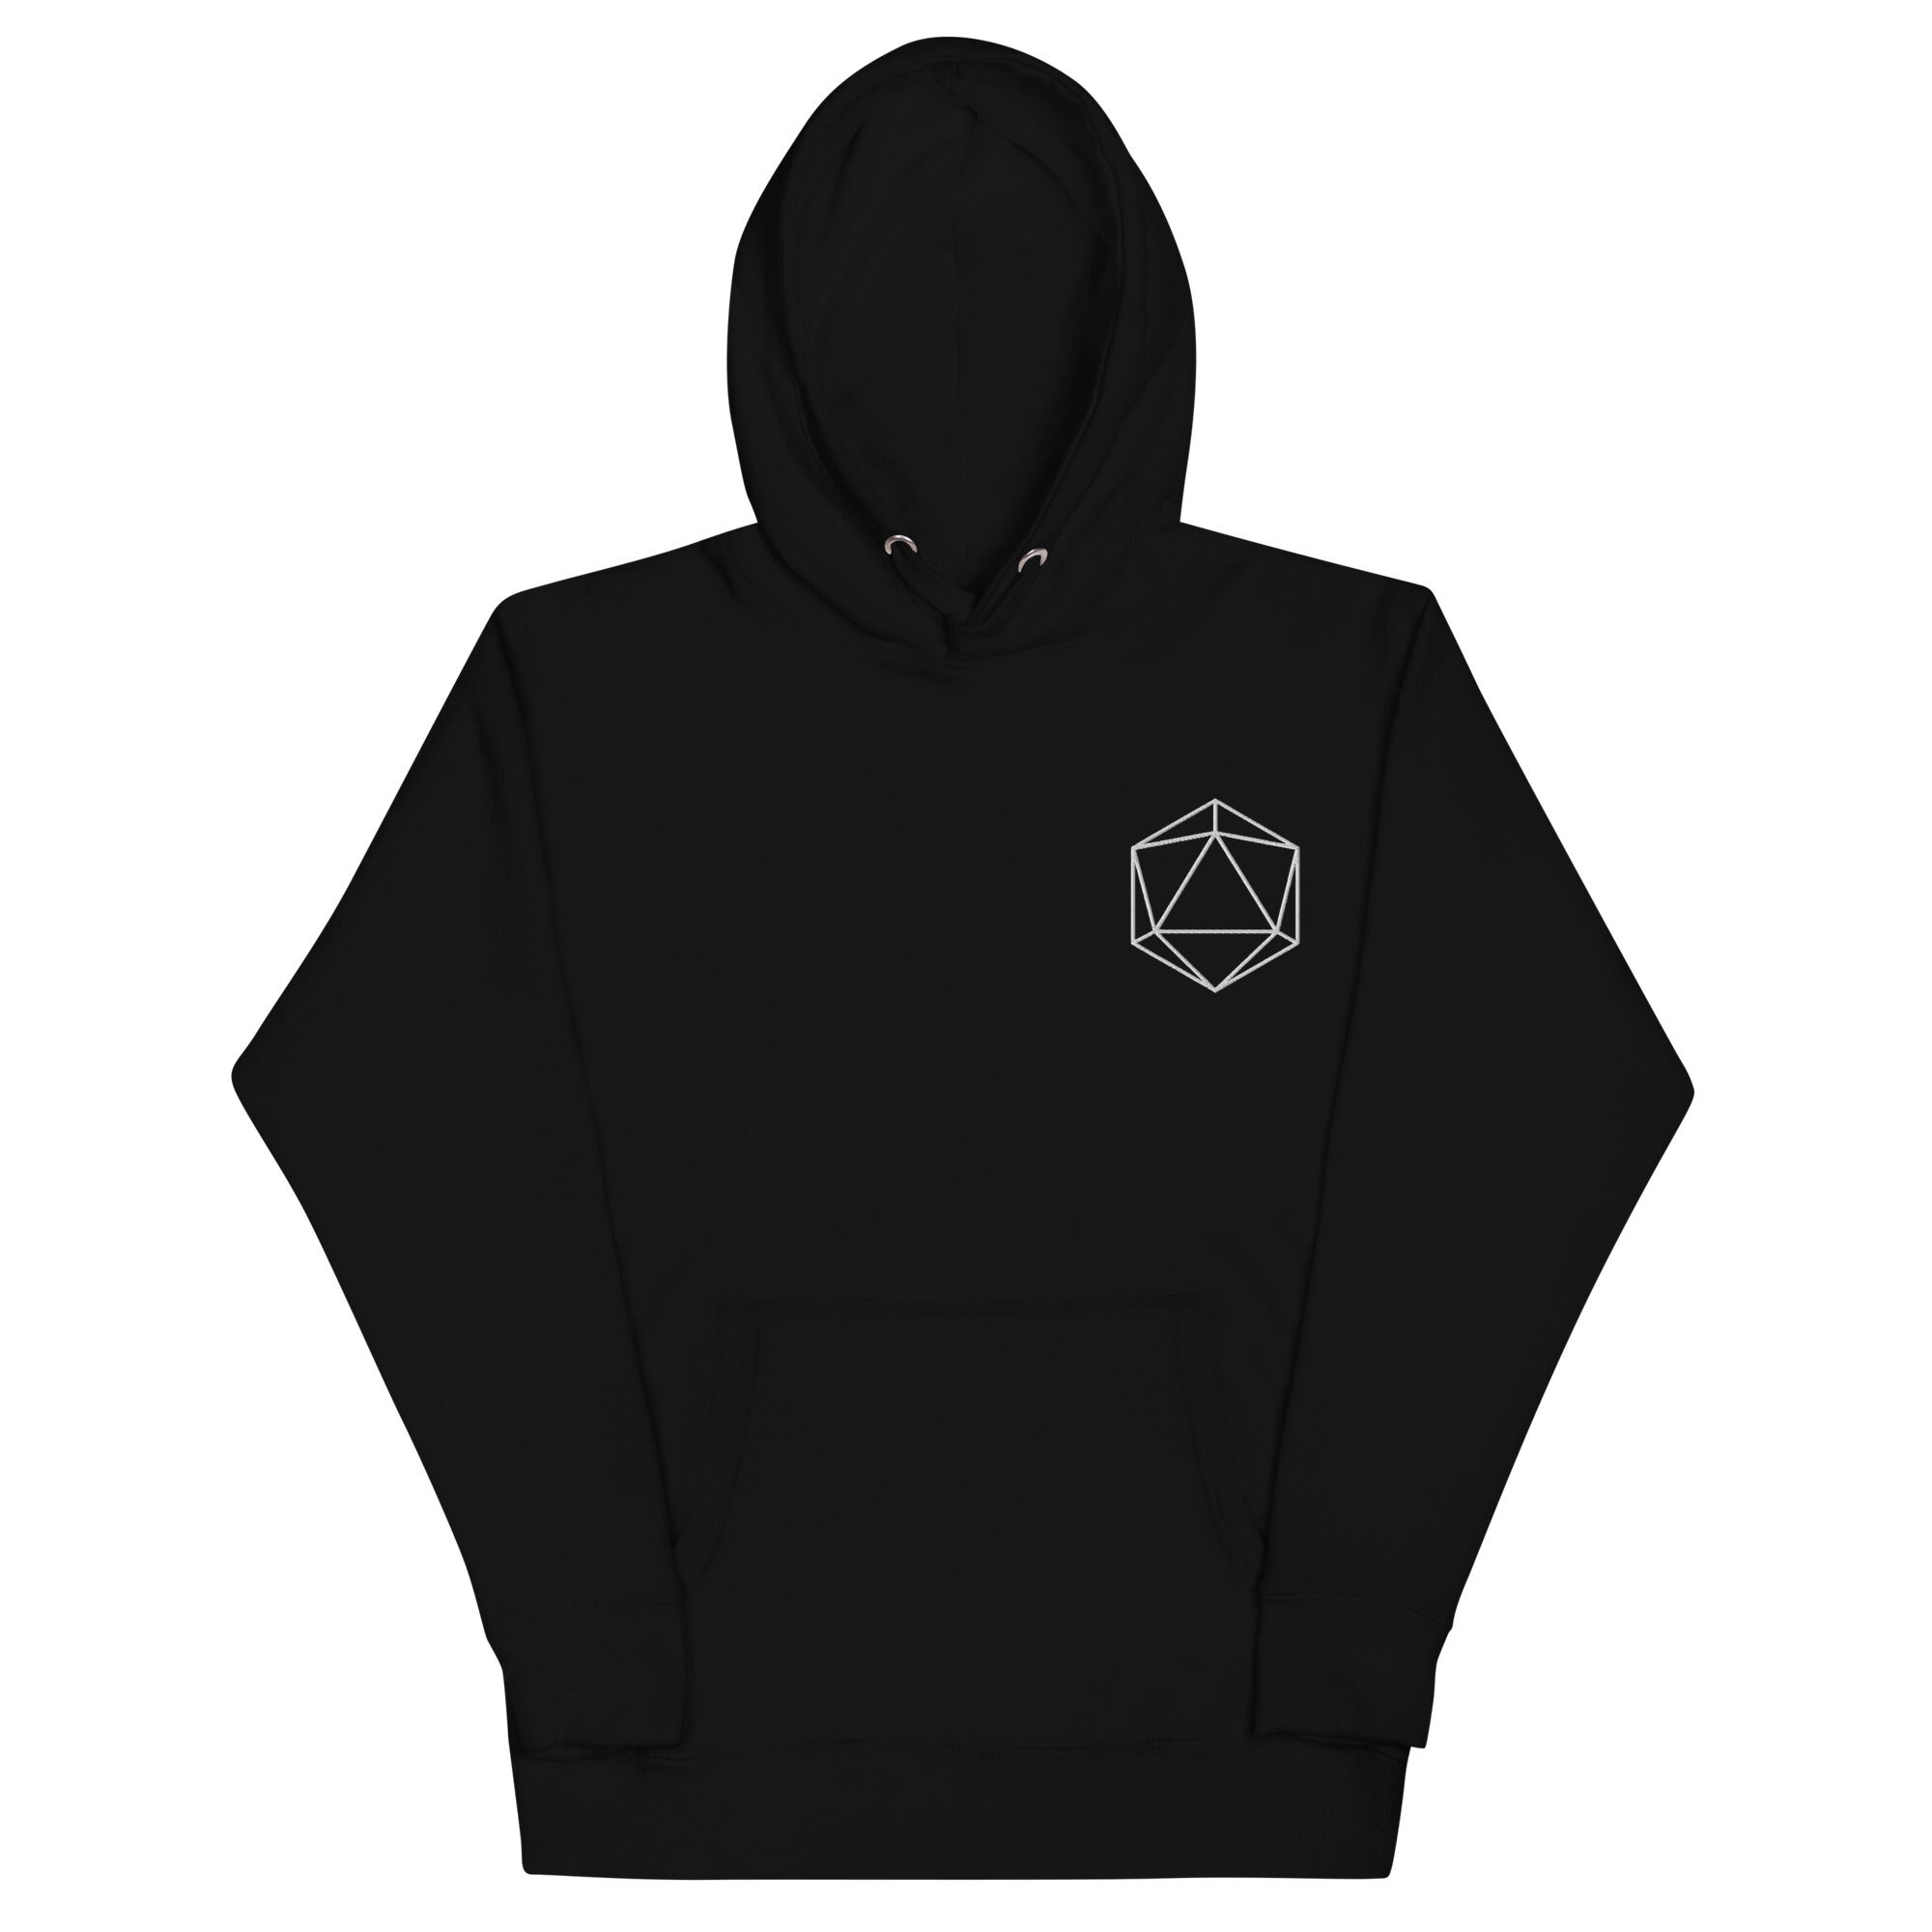 Odesza embroidered logo Hoodie